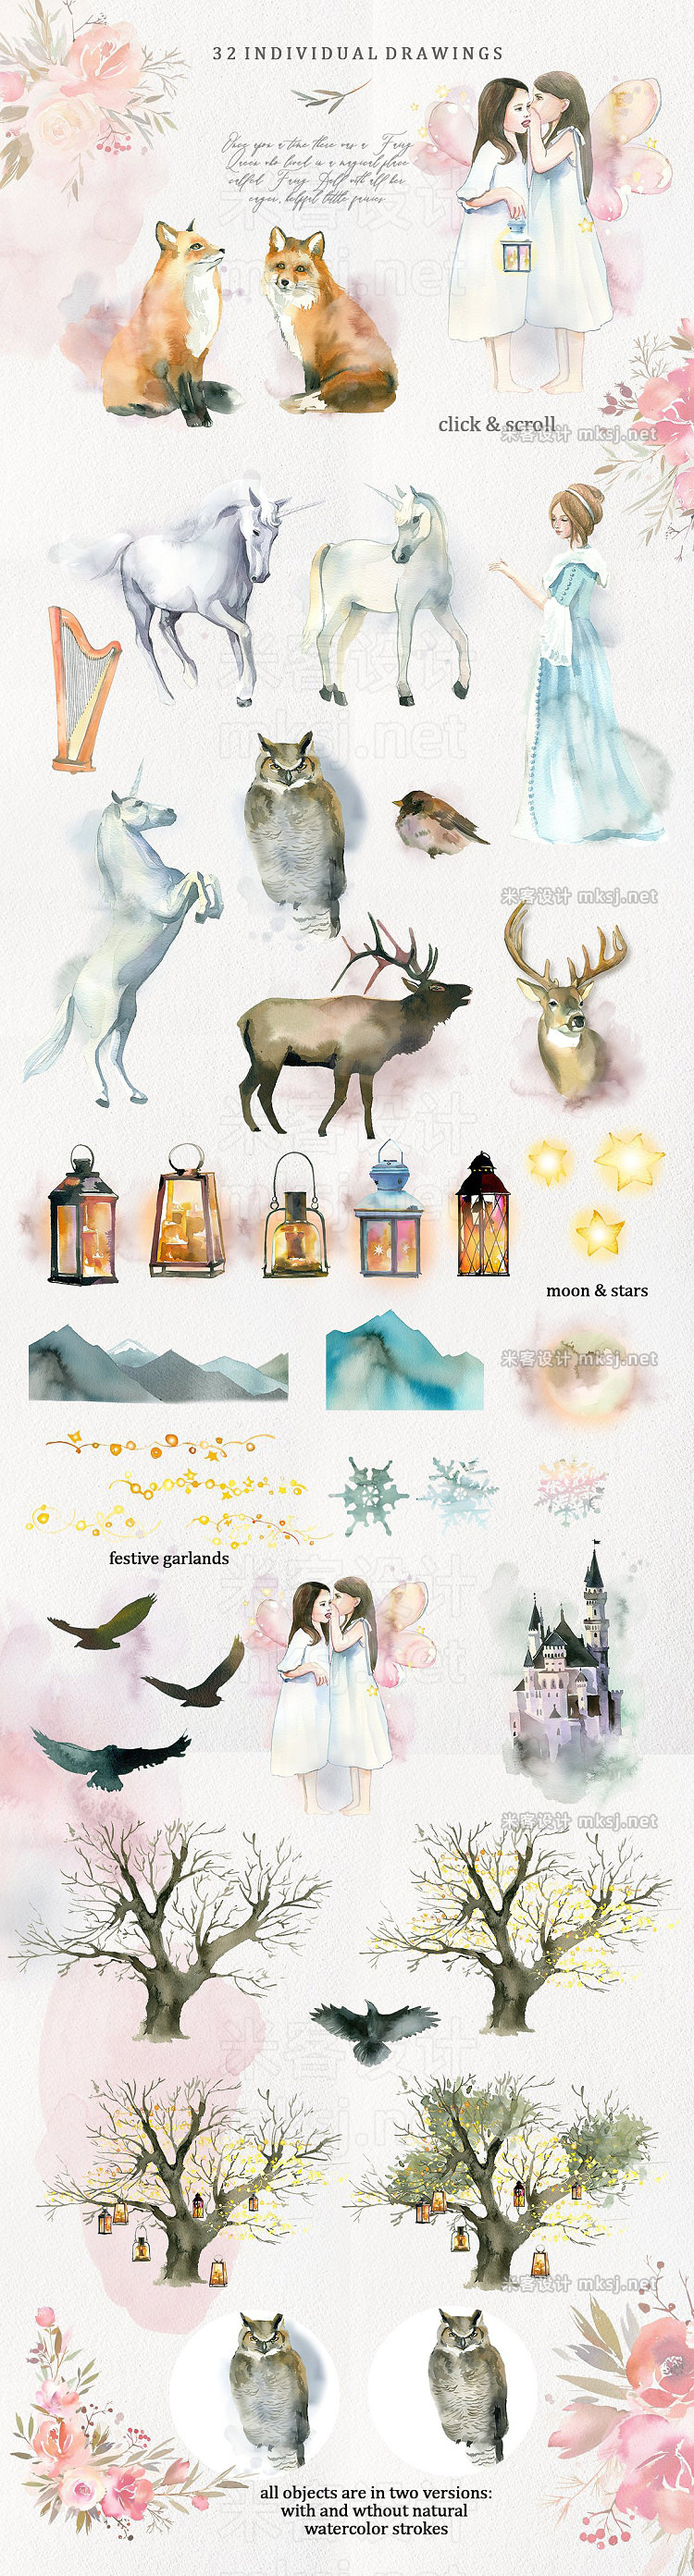 png素材 Dream - Fairy Watercolor Collection